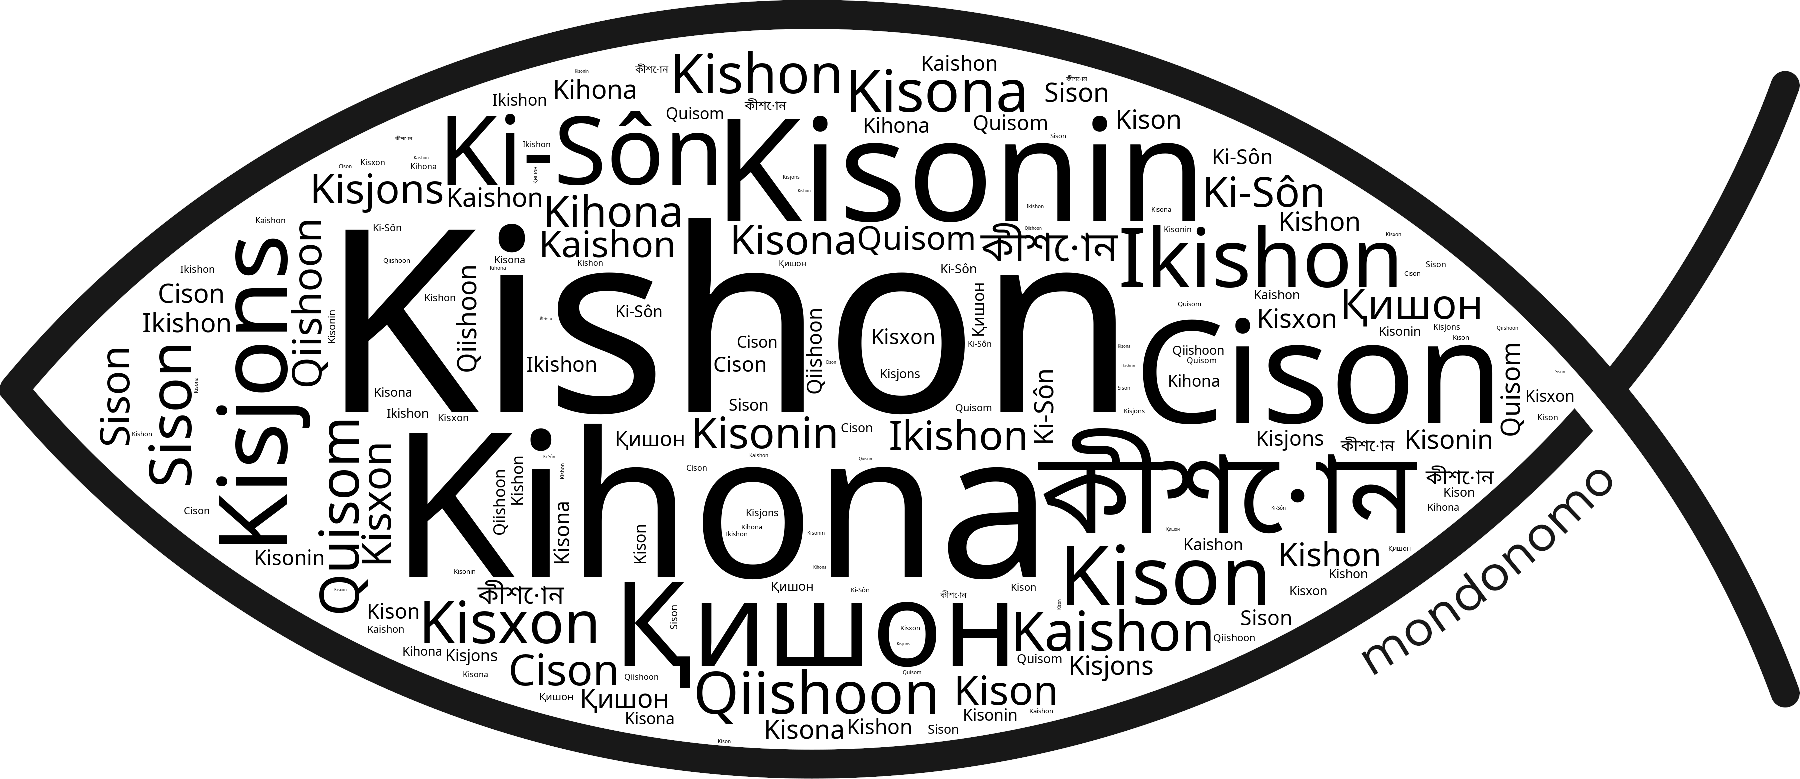 Name Kishon in the world's Bibles